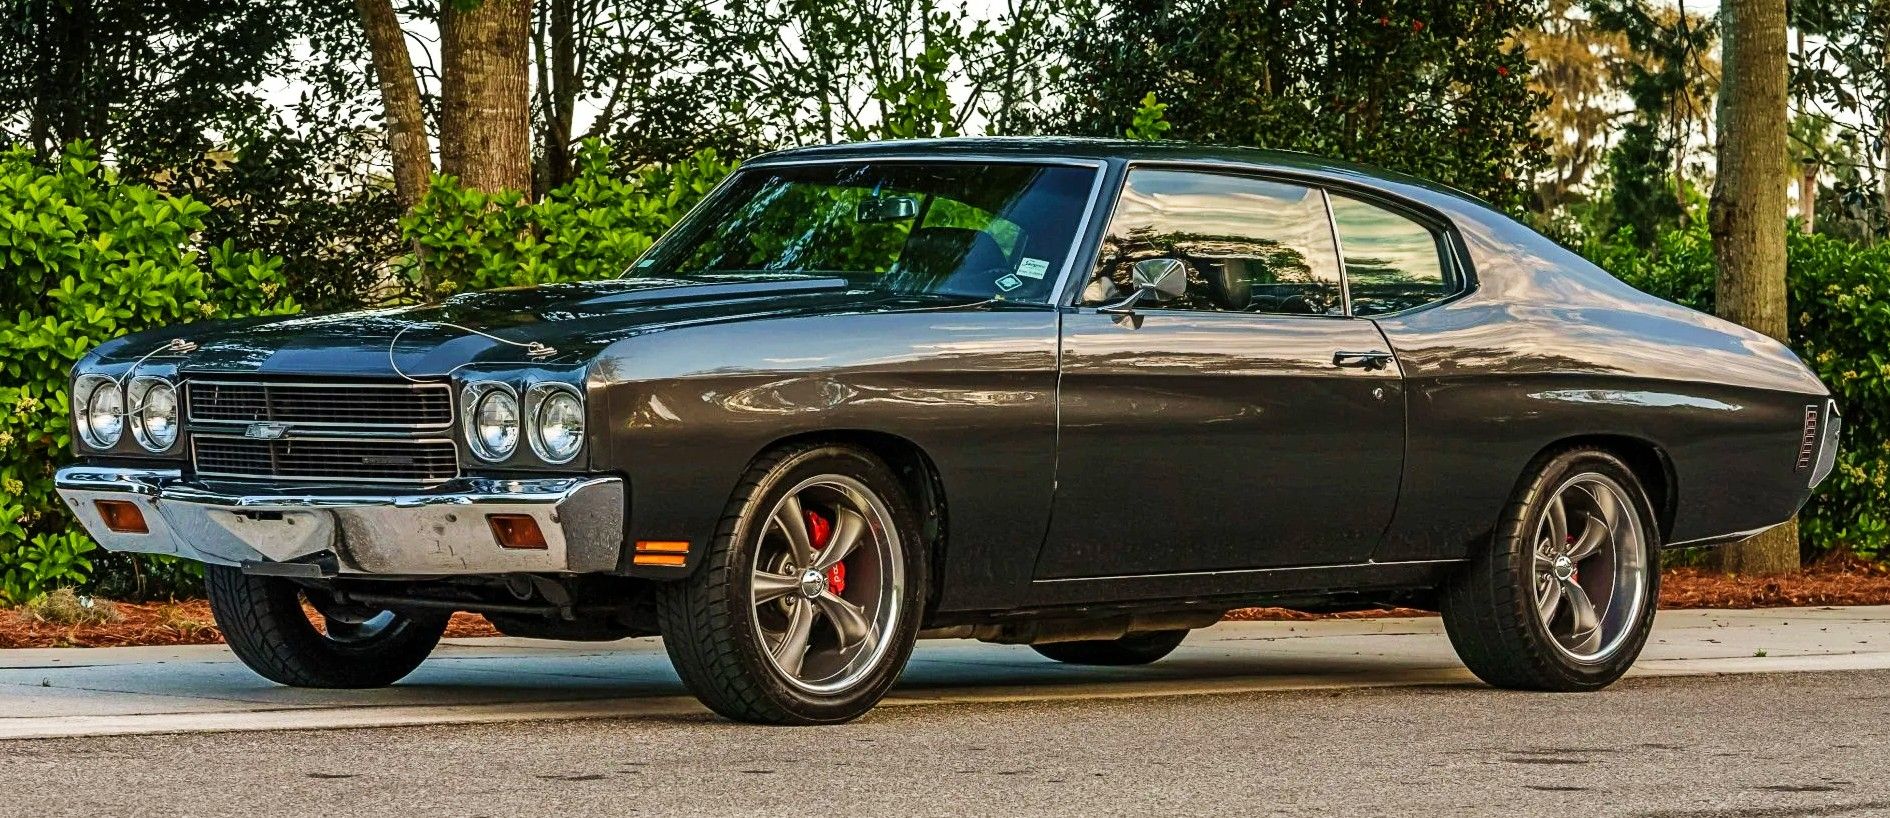 1970 Chevrolet Chevelle side angle